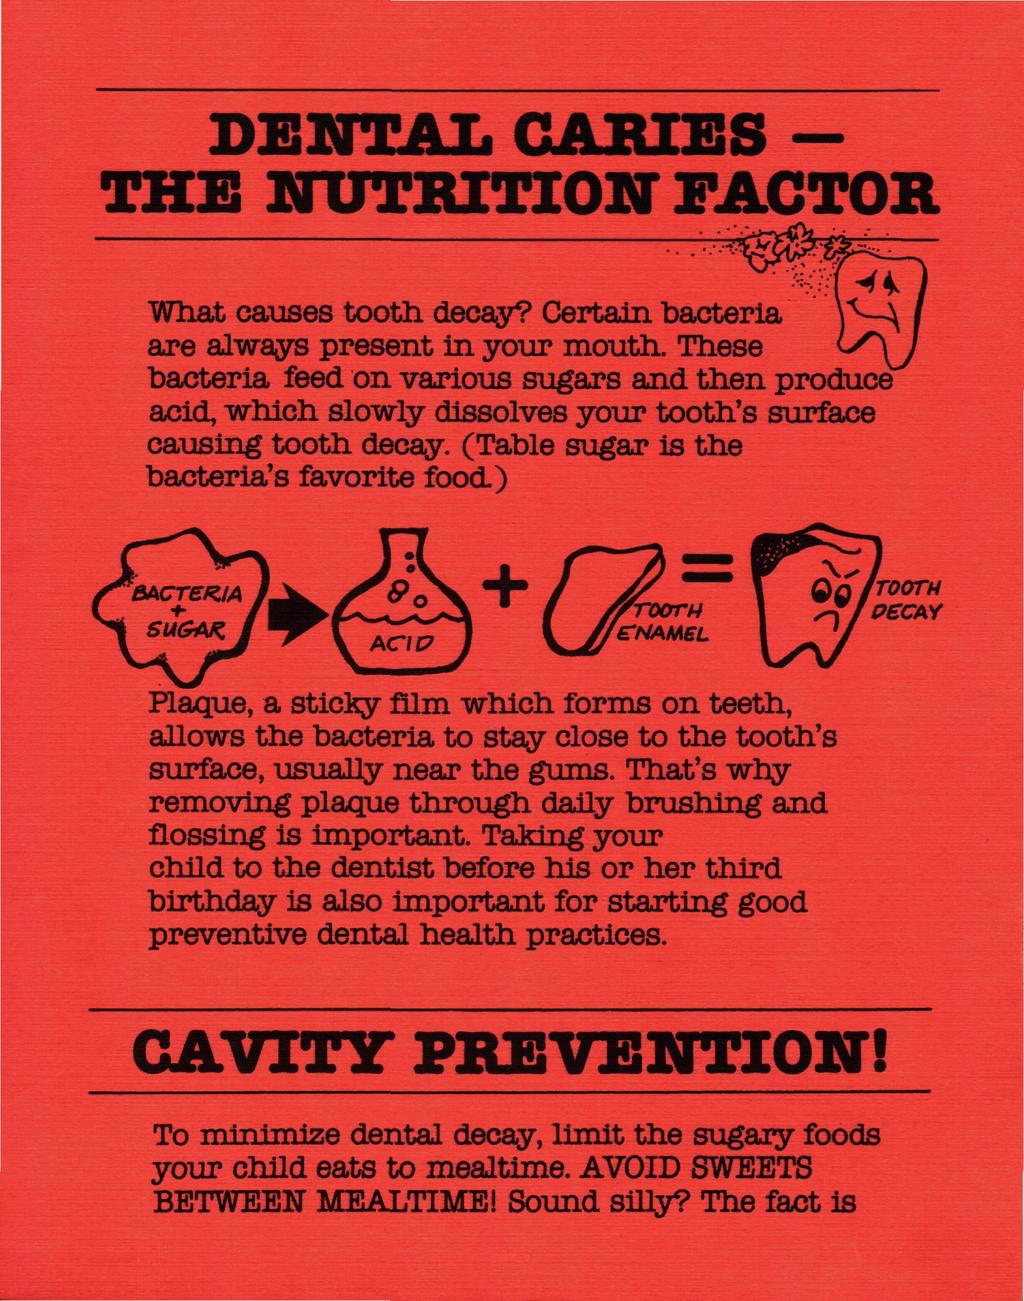 DENTAL GABIES THE NUTRITION FACTOR What causes tooth decay? Certain "bacteria are always present in your mouth.